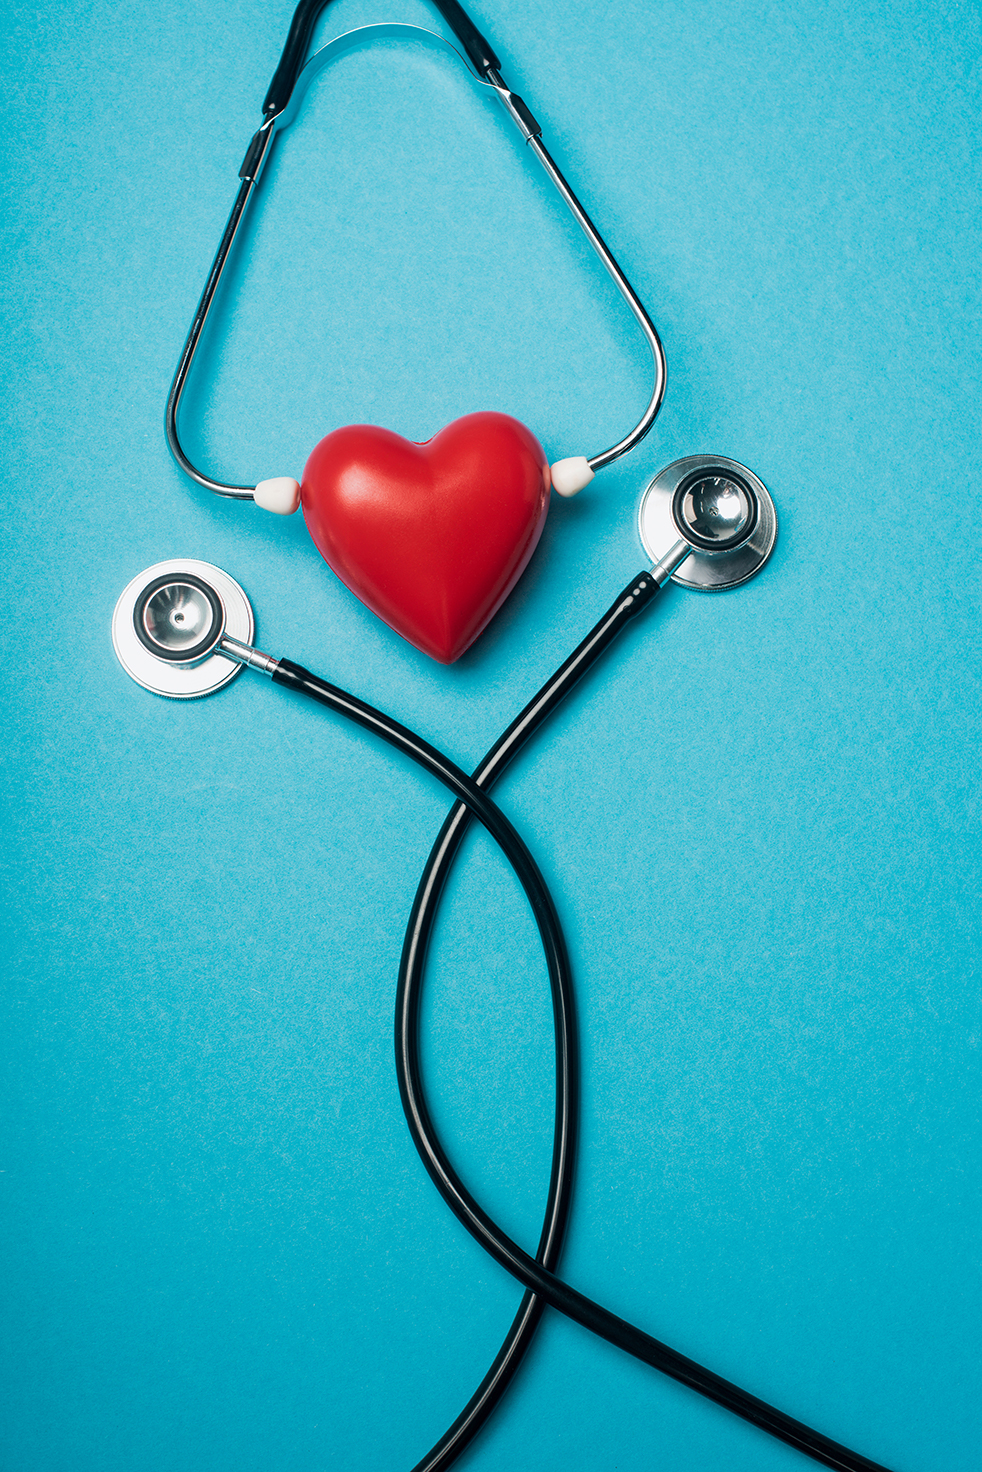 Image of a stethoscope and heart 